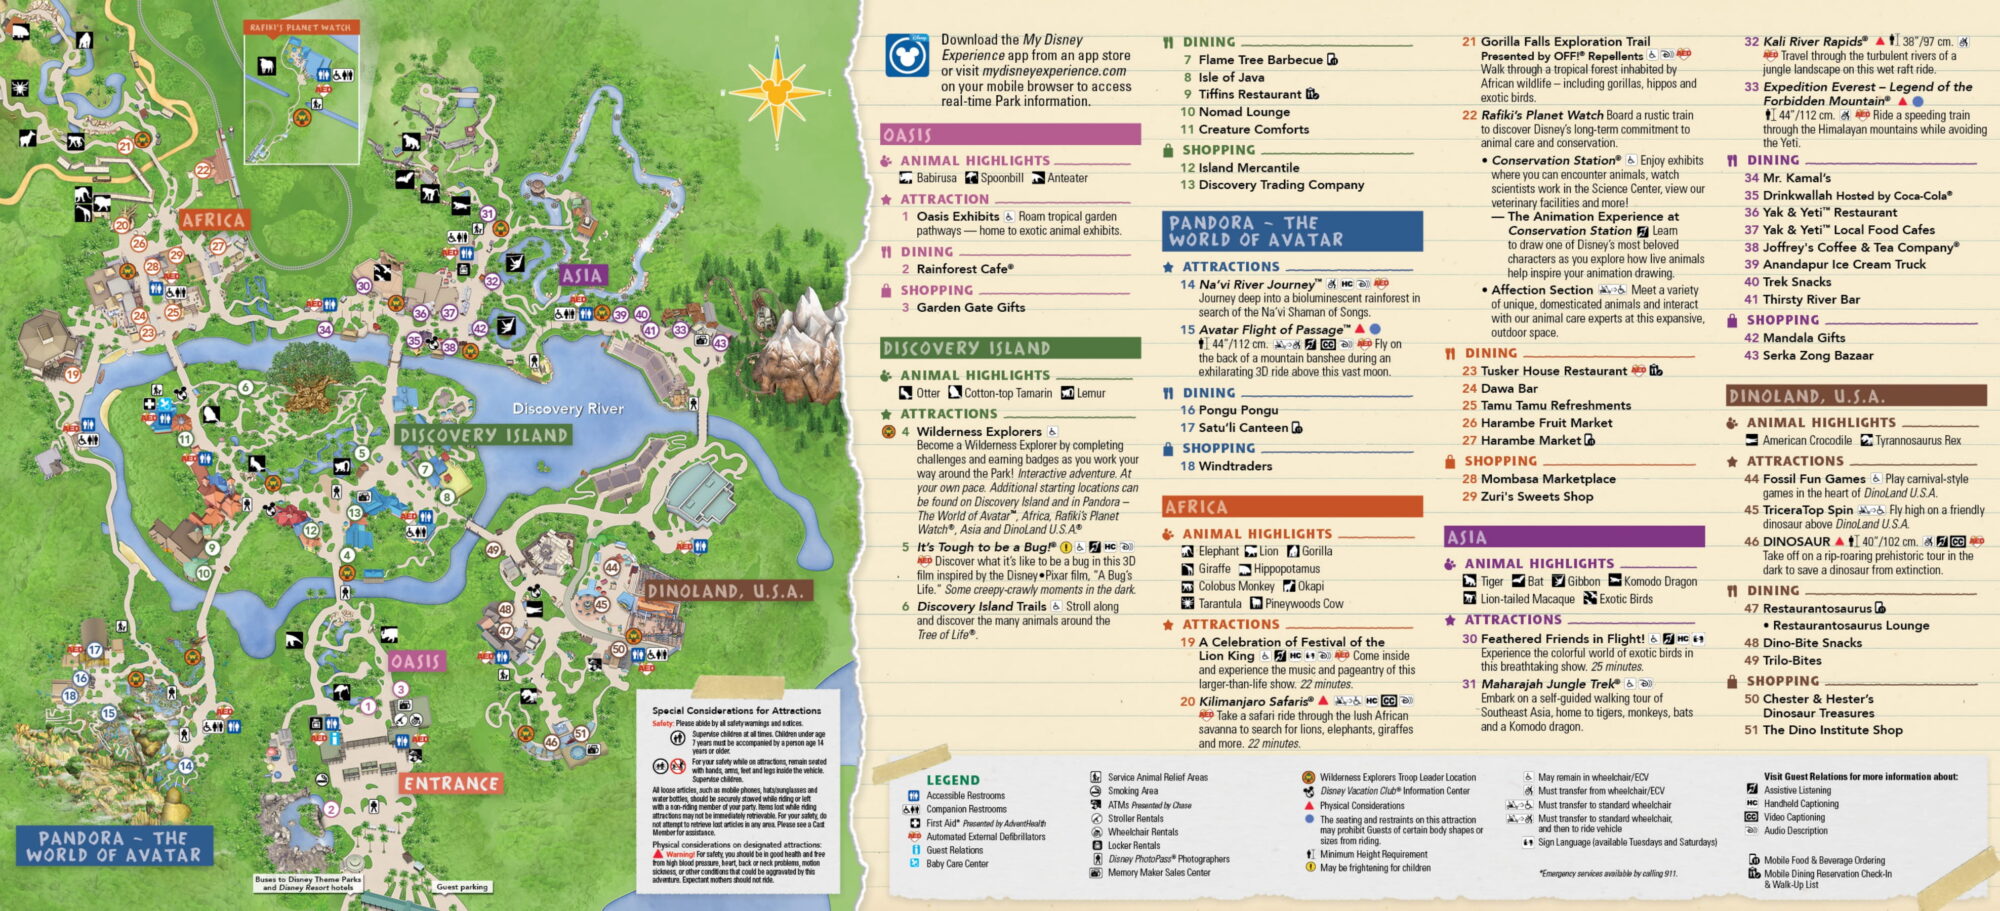 New Animal Kingdom Park Map Adds Profanity Rules, Removes Masked Guests